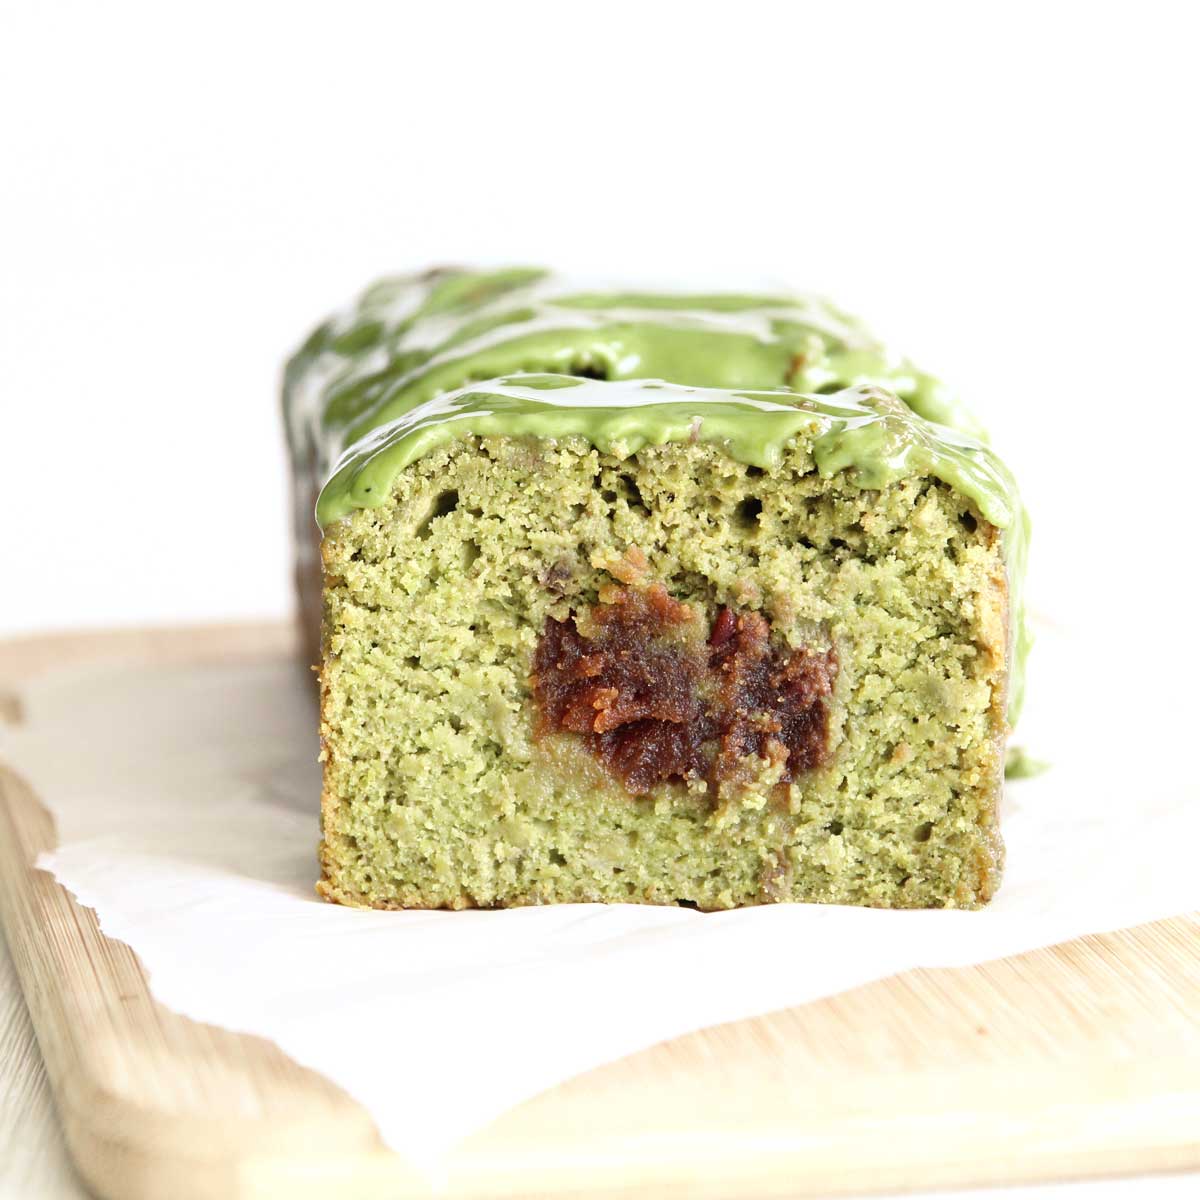 How to Make Matcha Banana Bread with Red Bean Paste Filling - Vegan Chocolate Whipped Cream